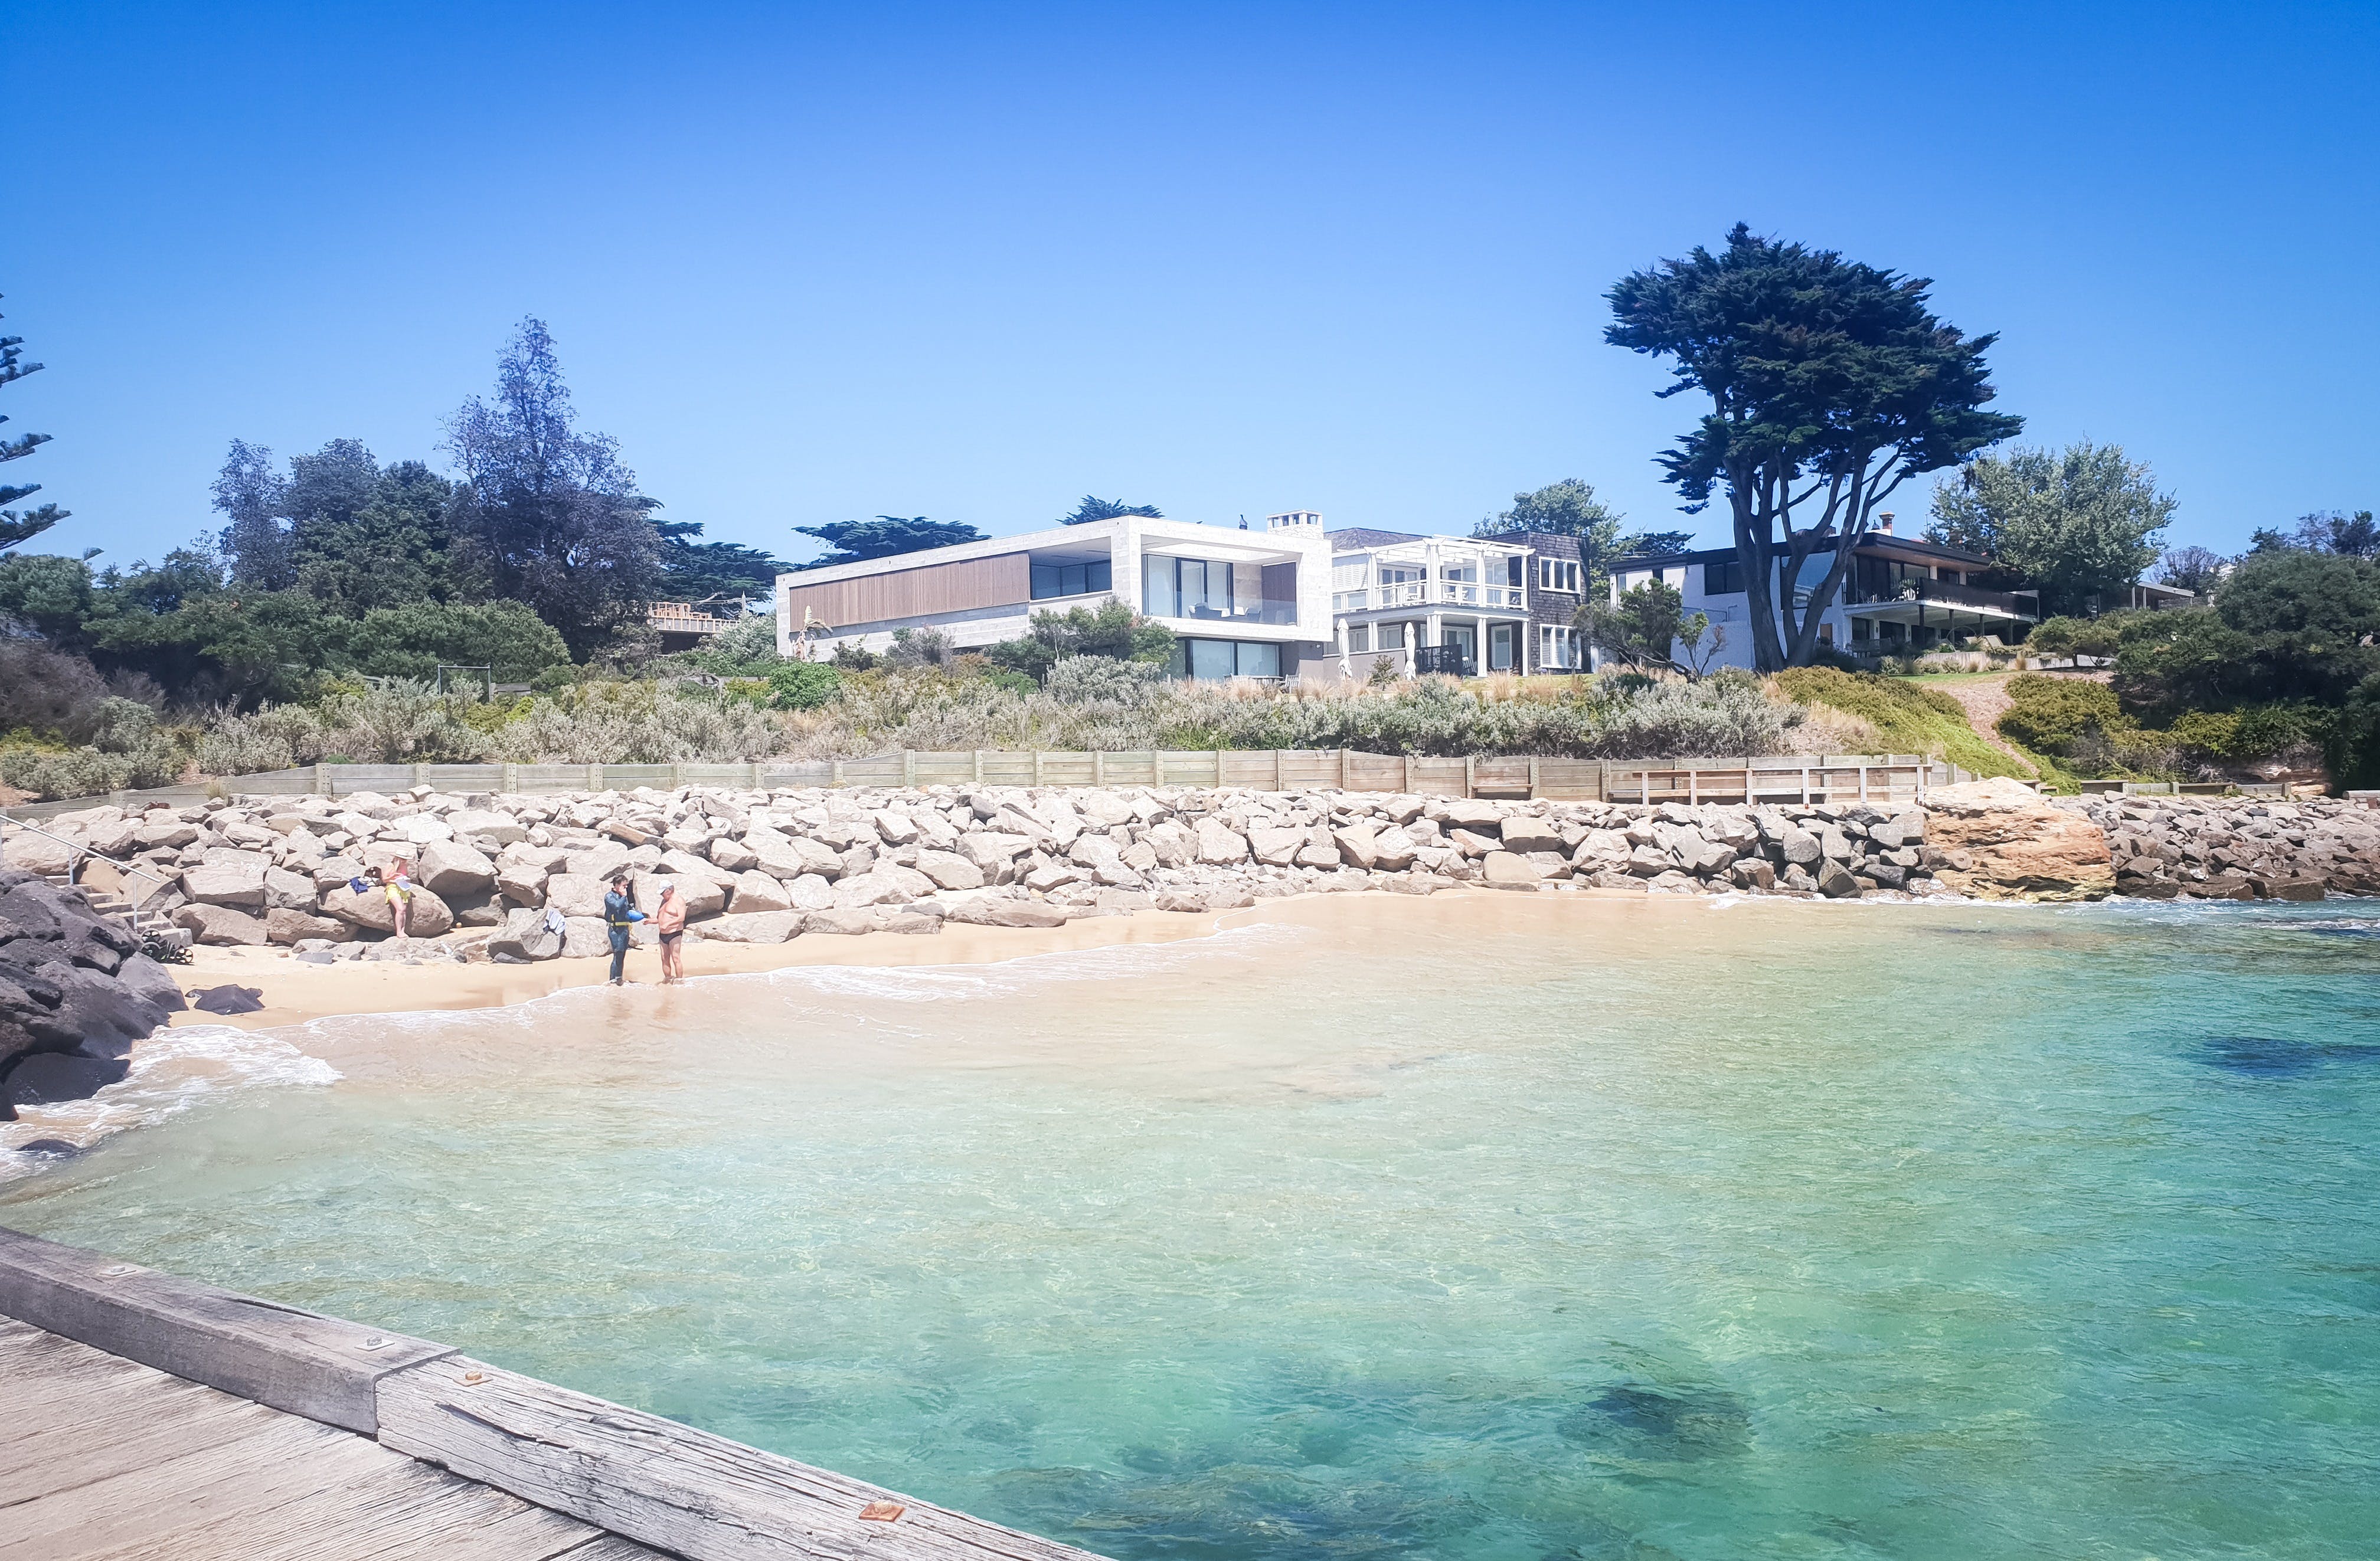 Portsea Front Beach - Find Attractions